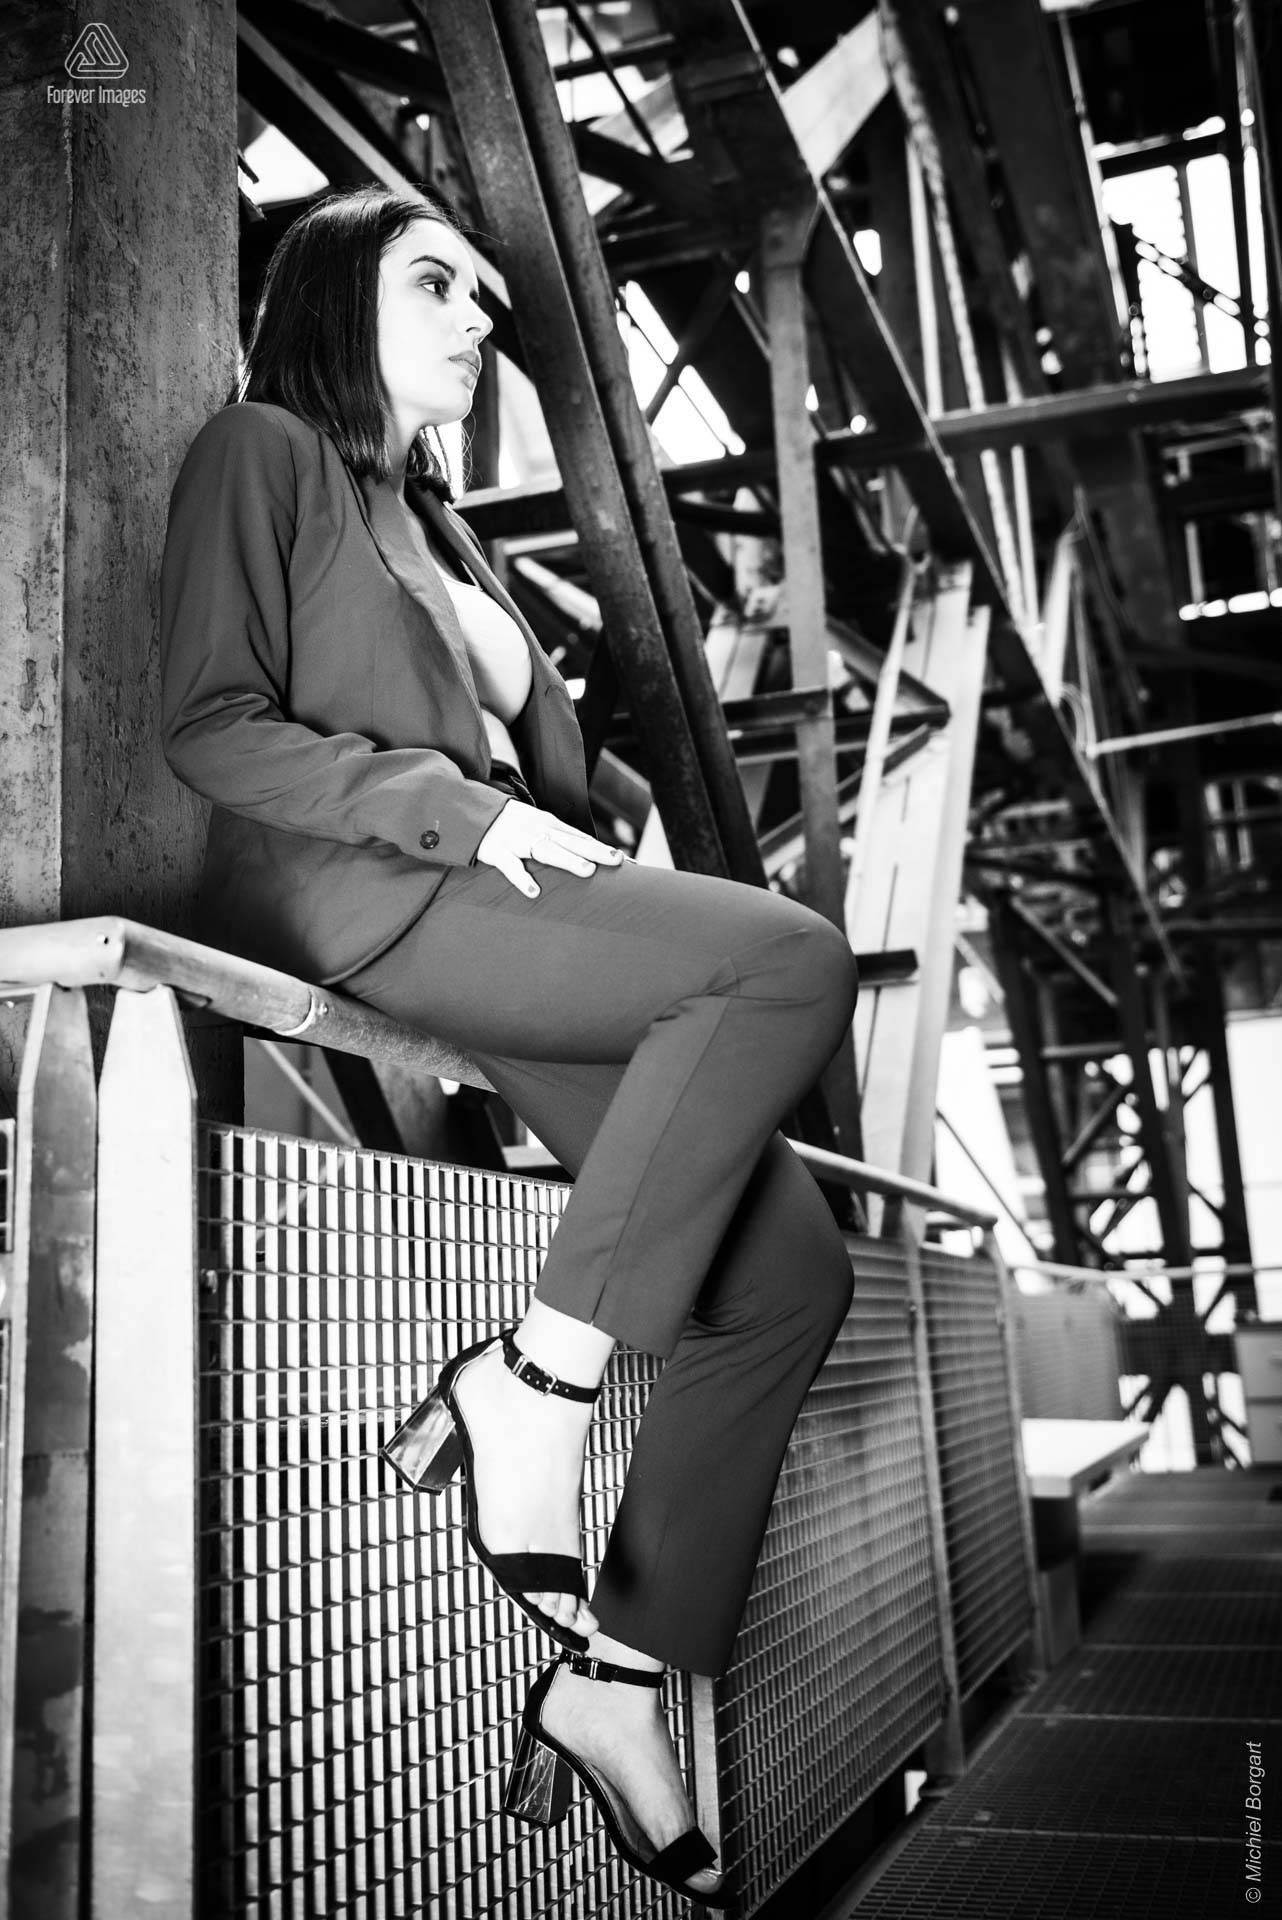 Portrait photo black and white B&W lady sitting on railing | Isis Vaandrager NDSM Werf Amsterdam | Portrait Photographer Michiel Borgart - Forever Images.